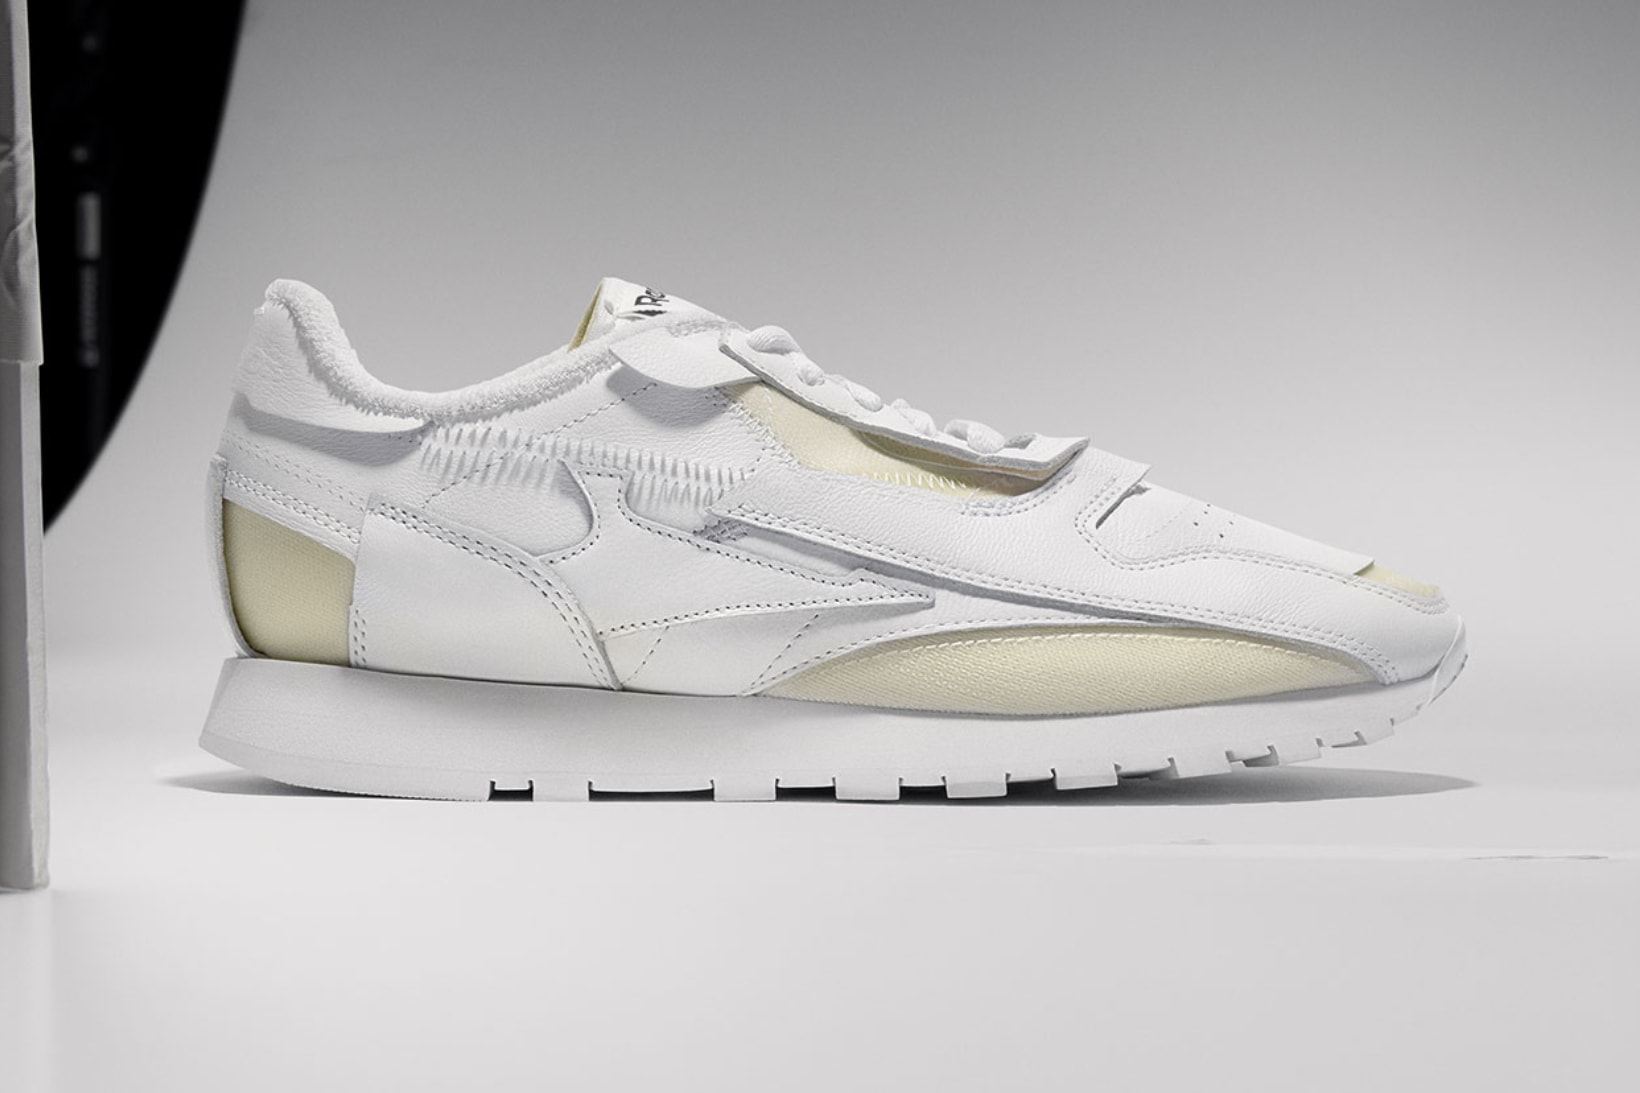 Maison Margiela x Reebok Classic Leather and Club C “Memory Of” V2 Release 